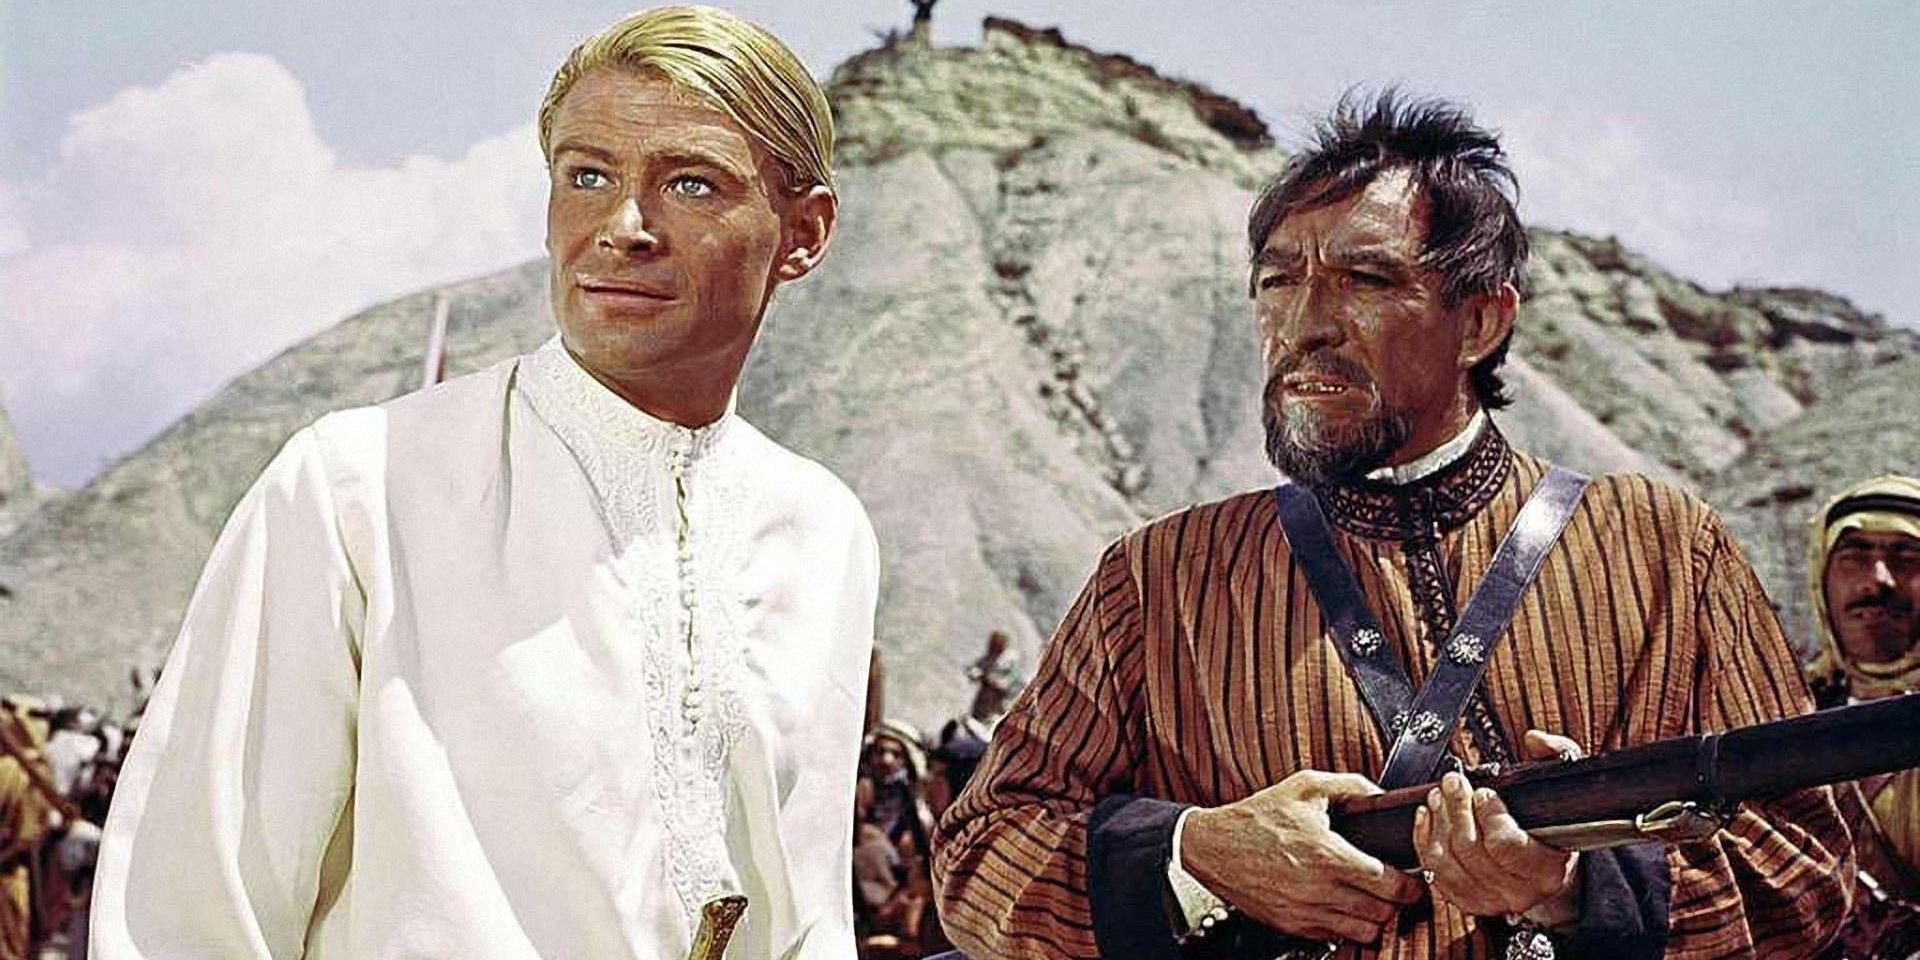 T.E. Lawrence with another man in the desert in Lawrence of Arabia